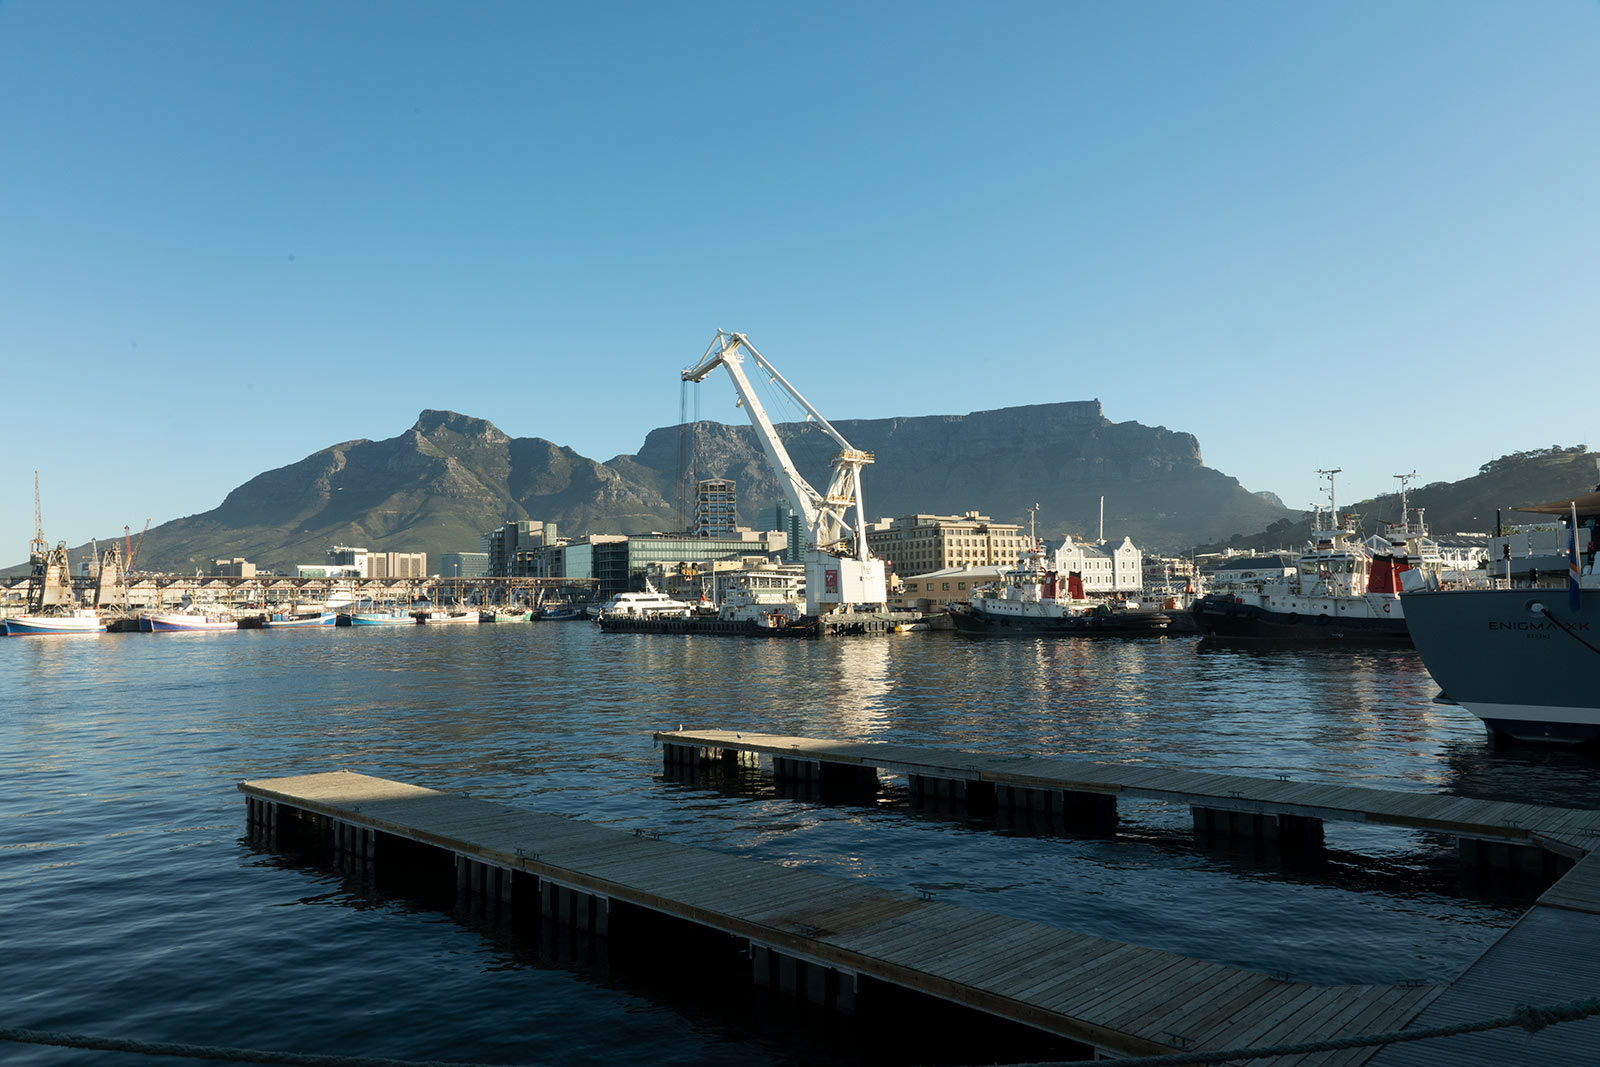 V&A Waterfront in Cape Town, South Africa. Arriving into my favourite city